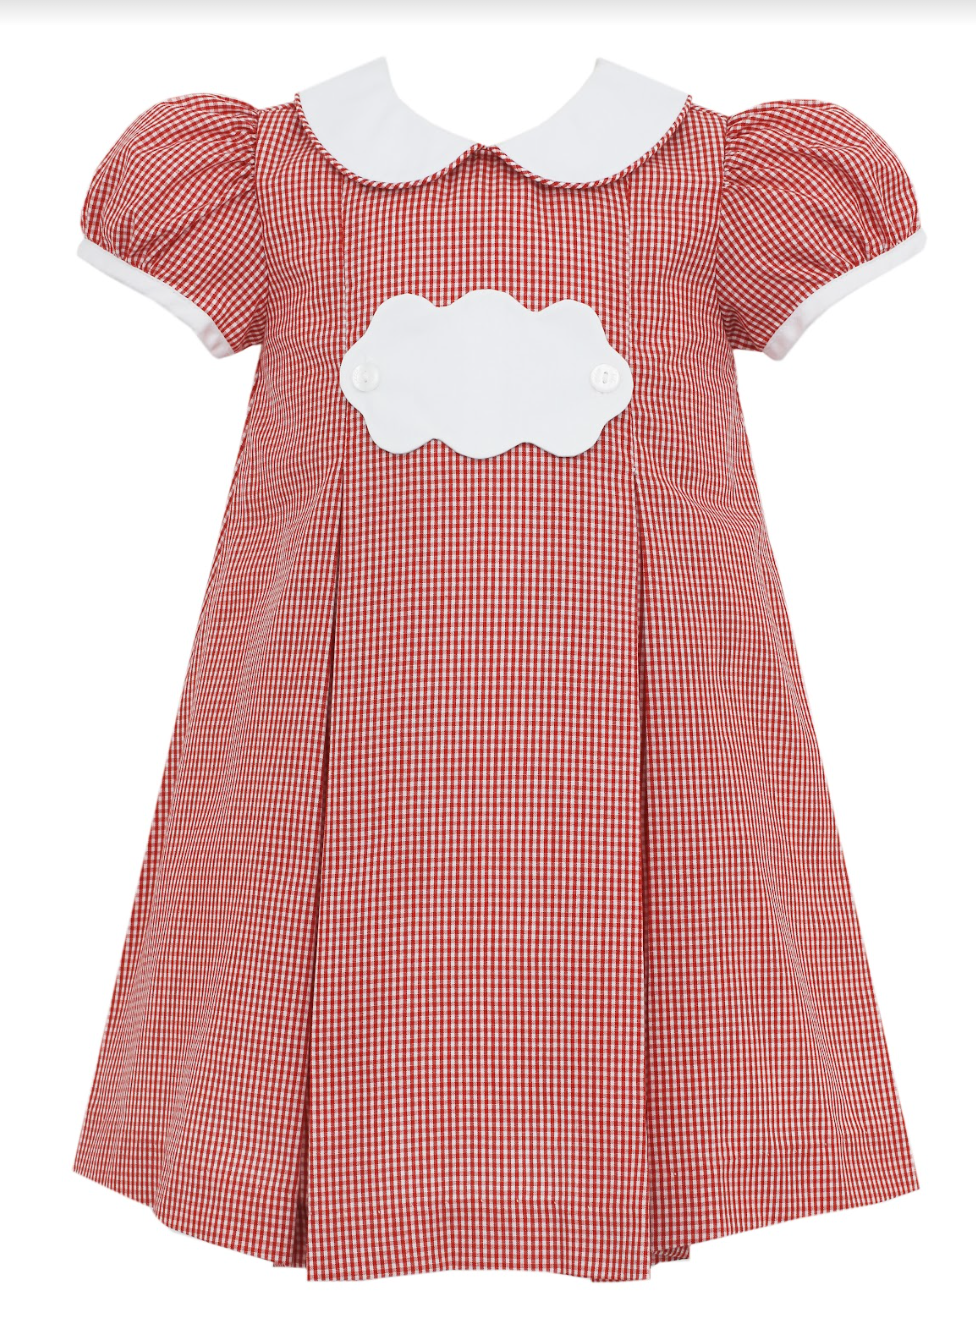 Red Gingham Dress with Tab